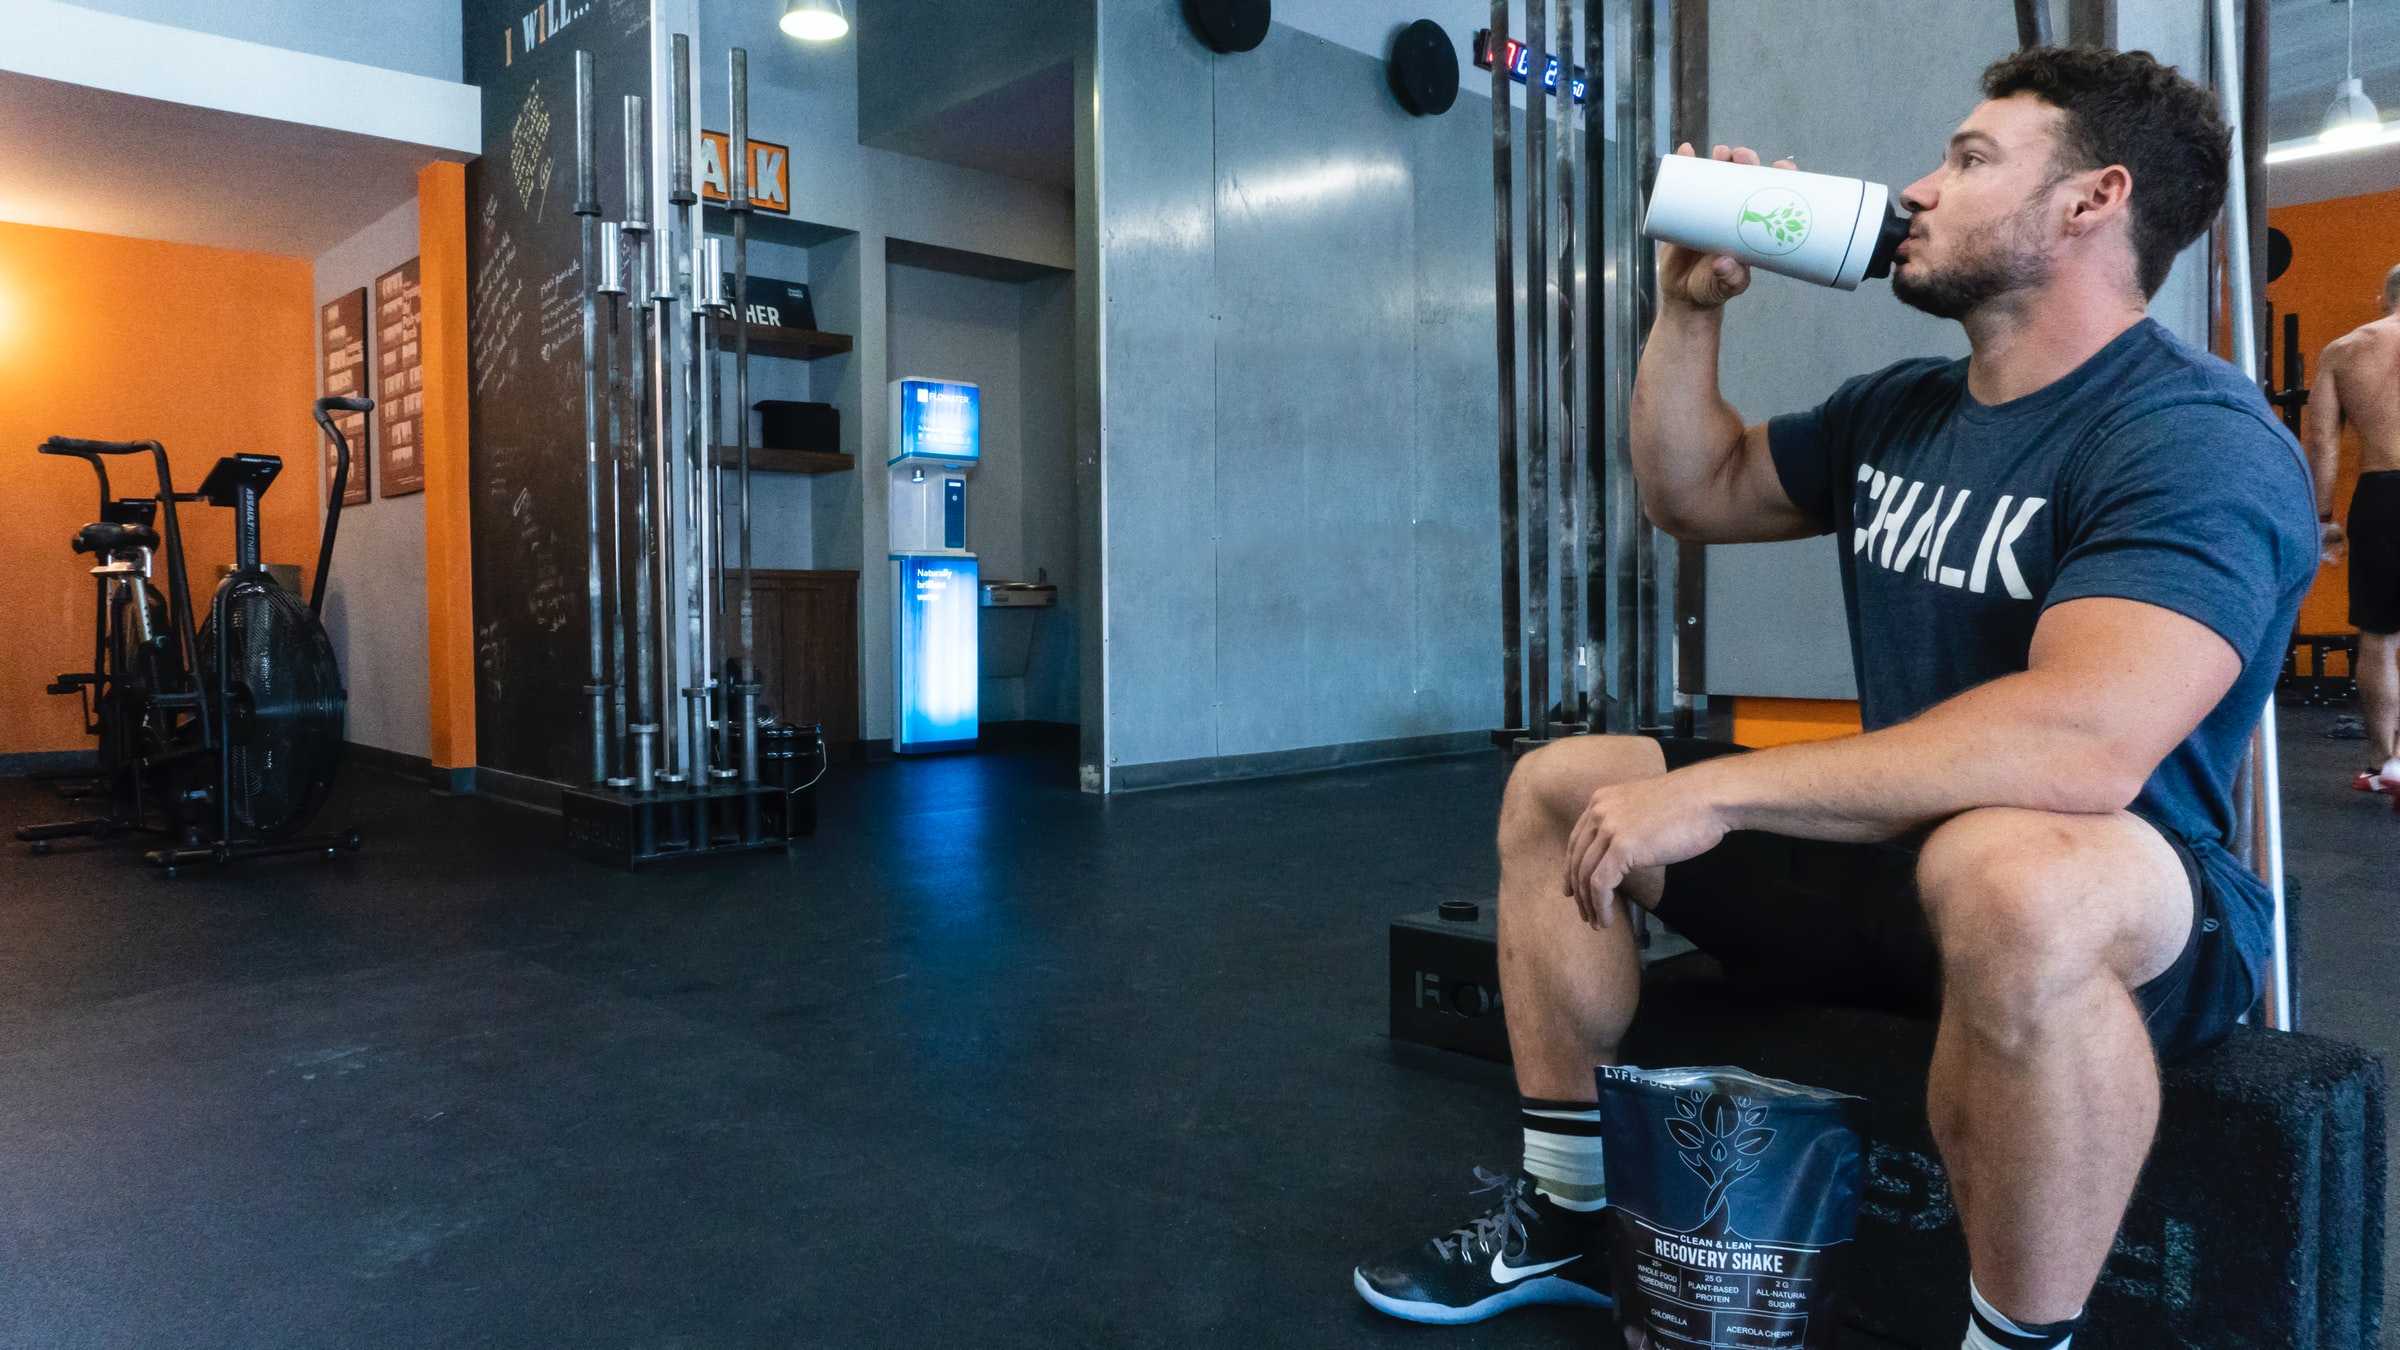 When Should I Drink Whey Protein? Should I Drink Whey Protein Before or After Workout?